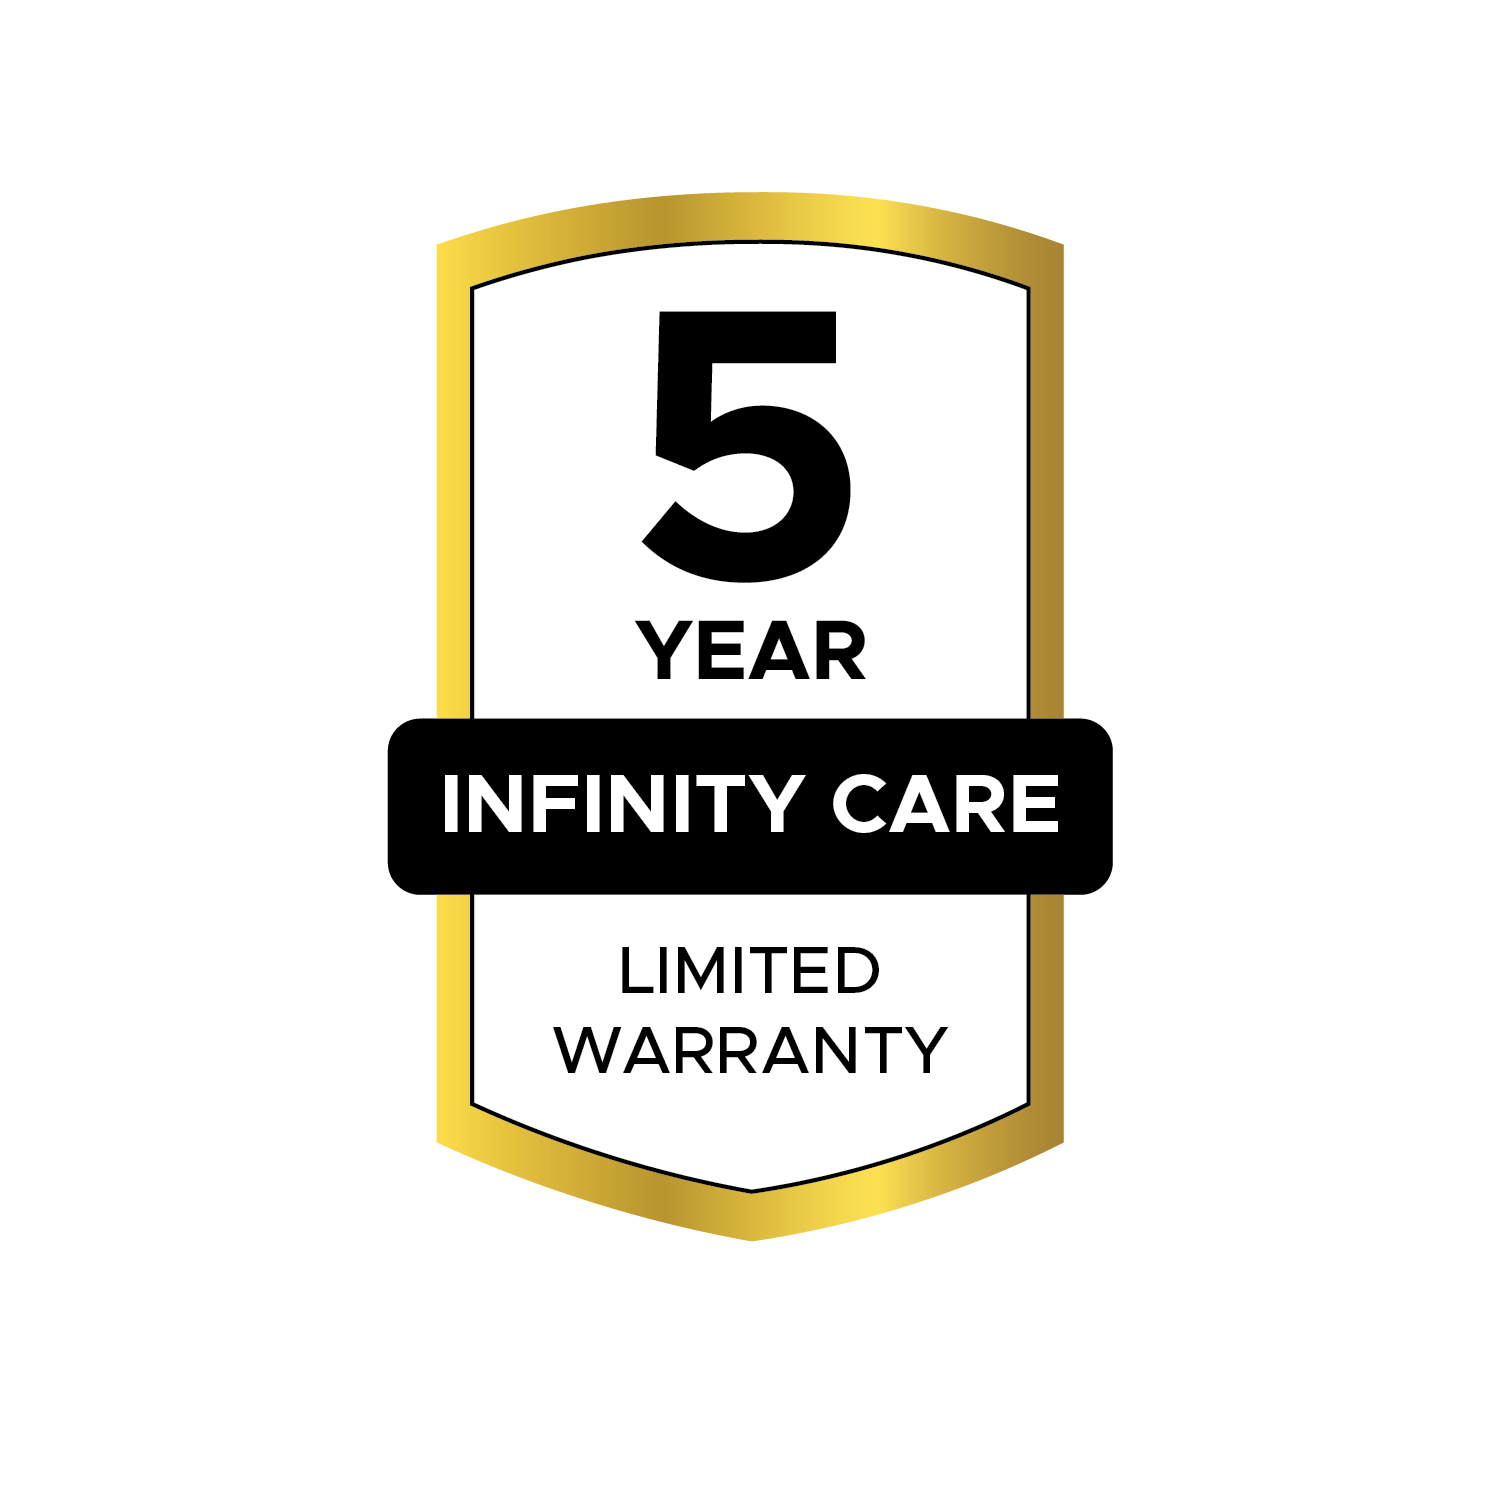 5 Year Infinity Care Limited Warranty Badge